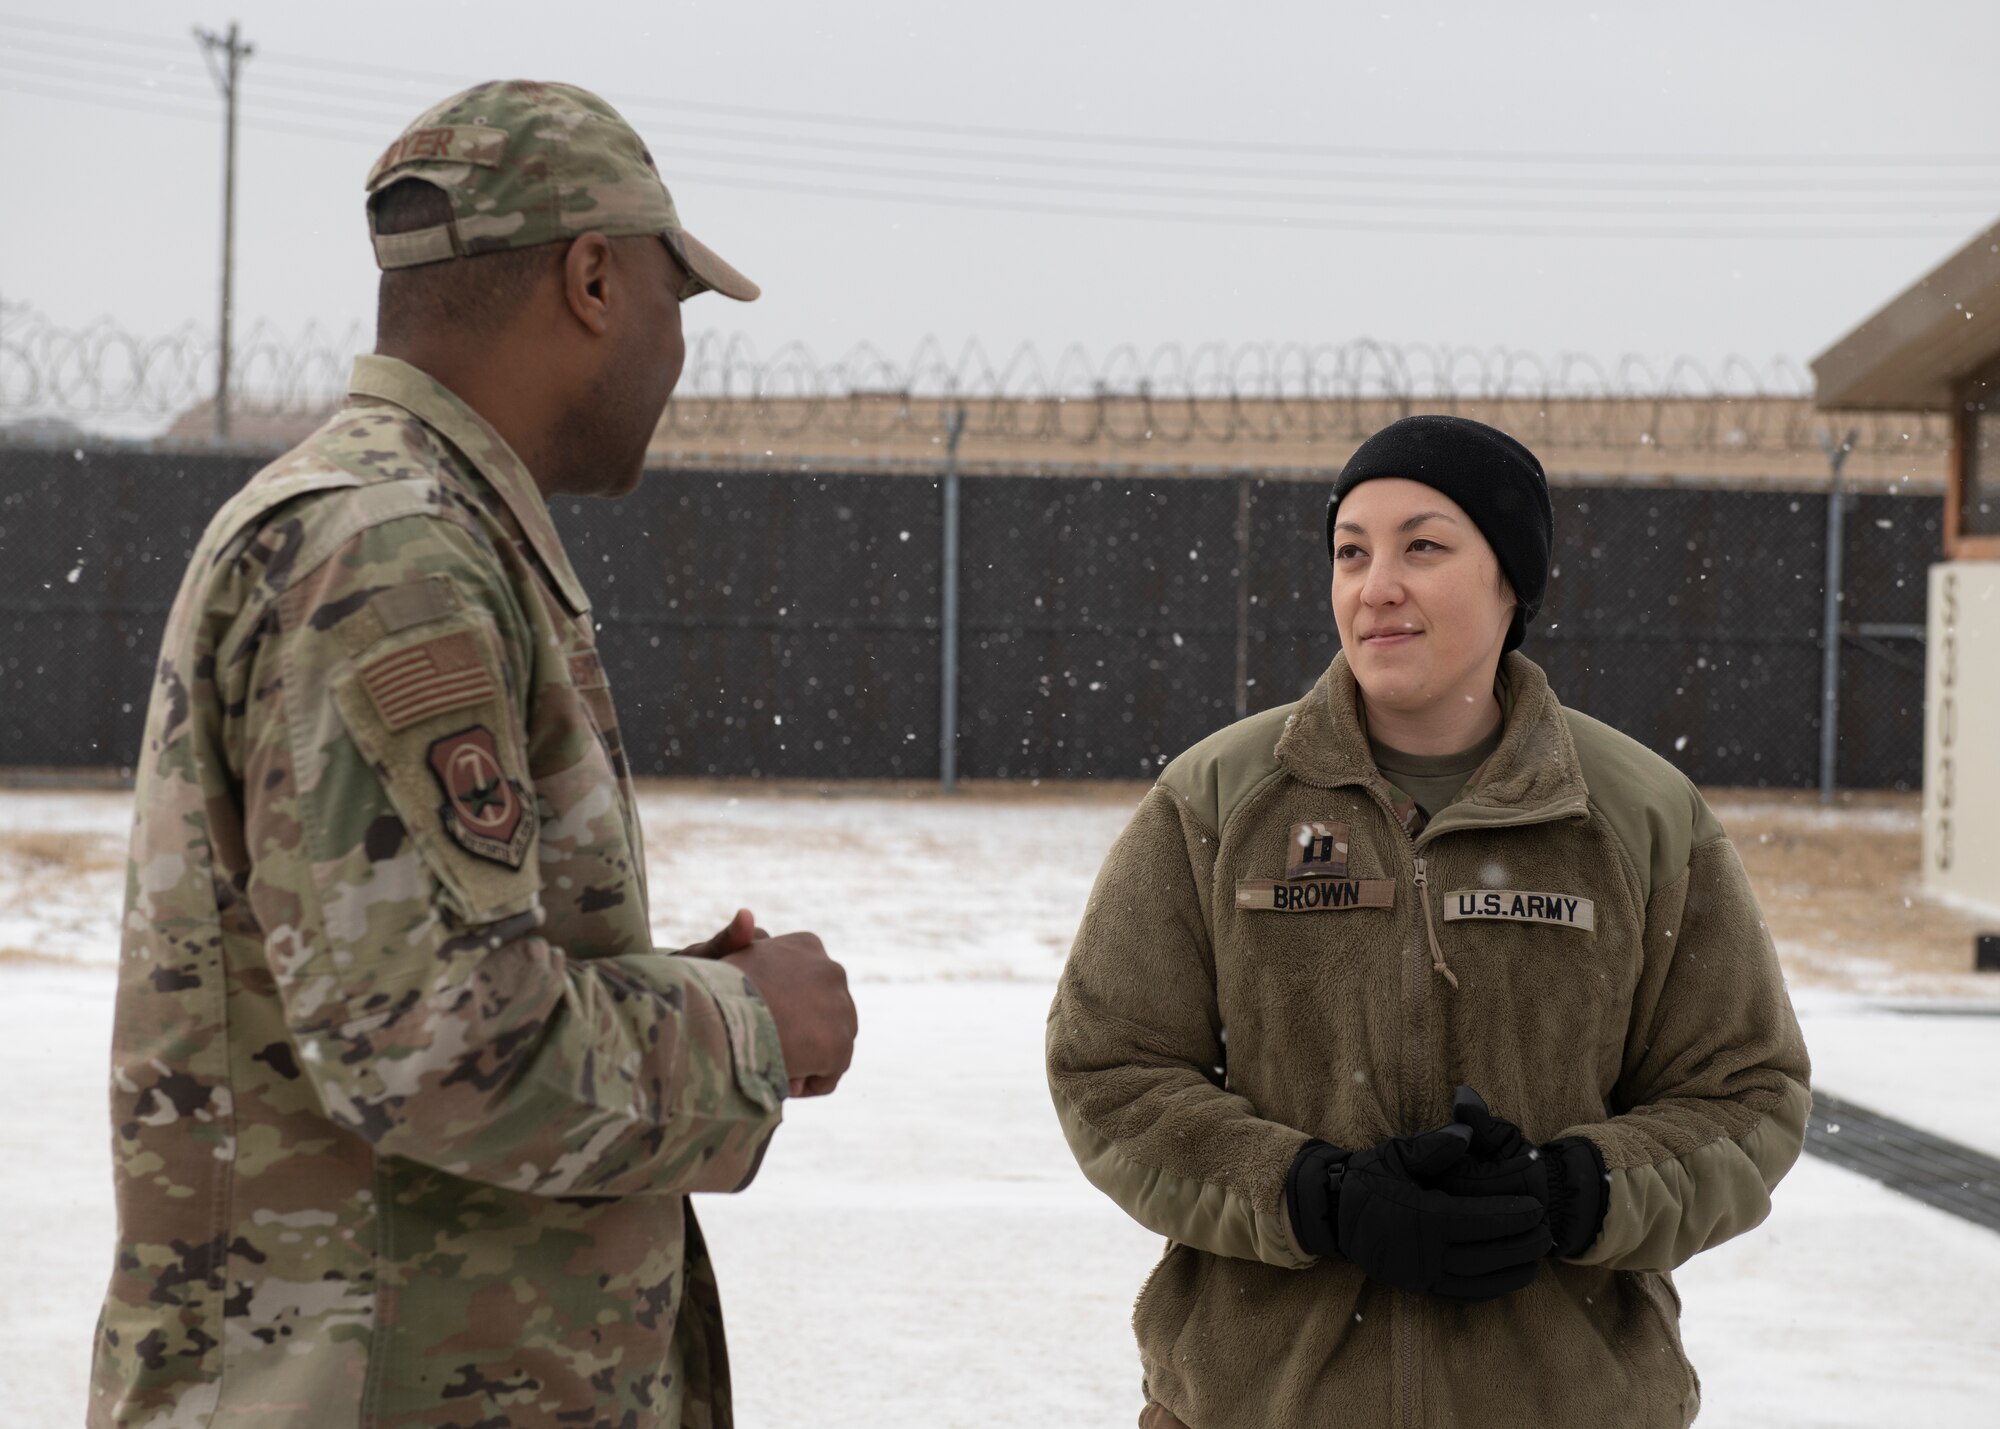 U.S. Air Force Chief Master Sgt. Alvin R. Dyer (left), 7th Air Force command chief, receives an Air Defense Artillery informational briefing from U.S. Army Capt. Sarah Brown (right) Alpha Battery 2-1 commander, at Kunsan Air Base, Republic of Korea, Jan. 26, 2023. Seventh AF leadership had the opportunity to learn how the ADA reinforces the unified security of the Korean peninsula. (U.S. Air Force photo by Staff Sgt. Isaiah J. Soliz)